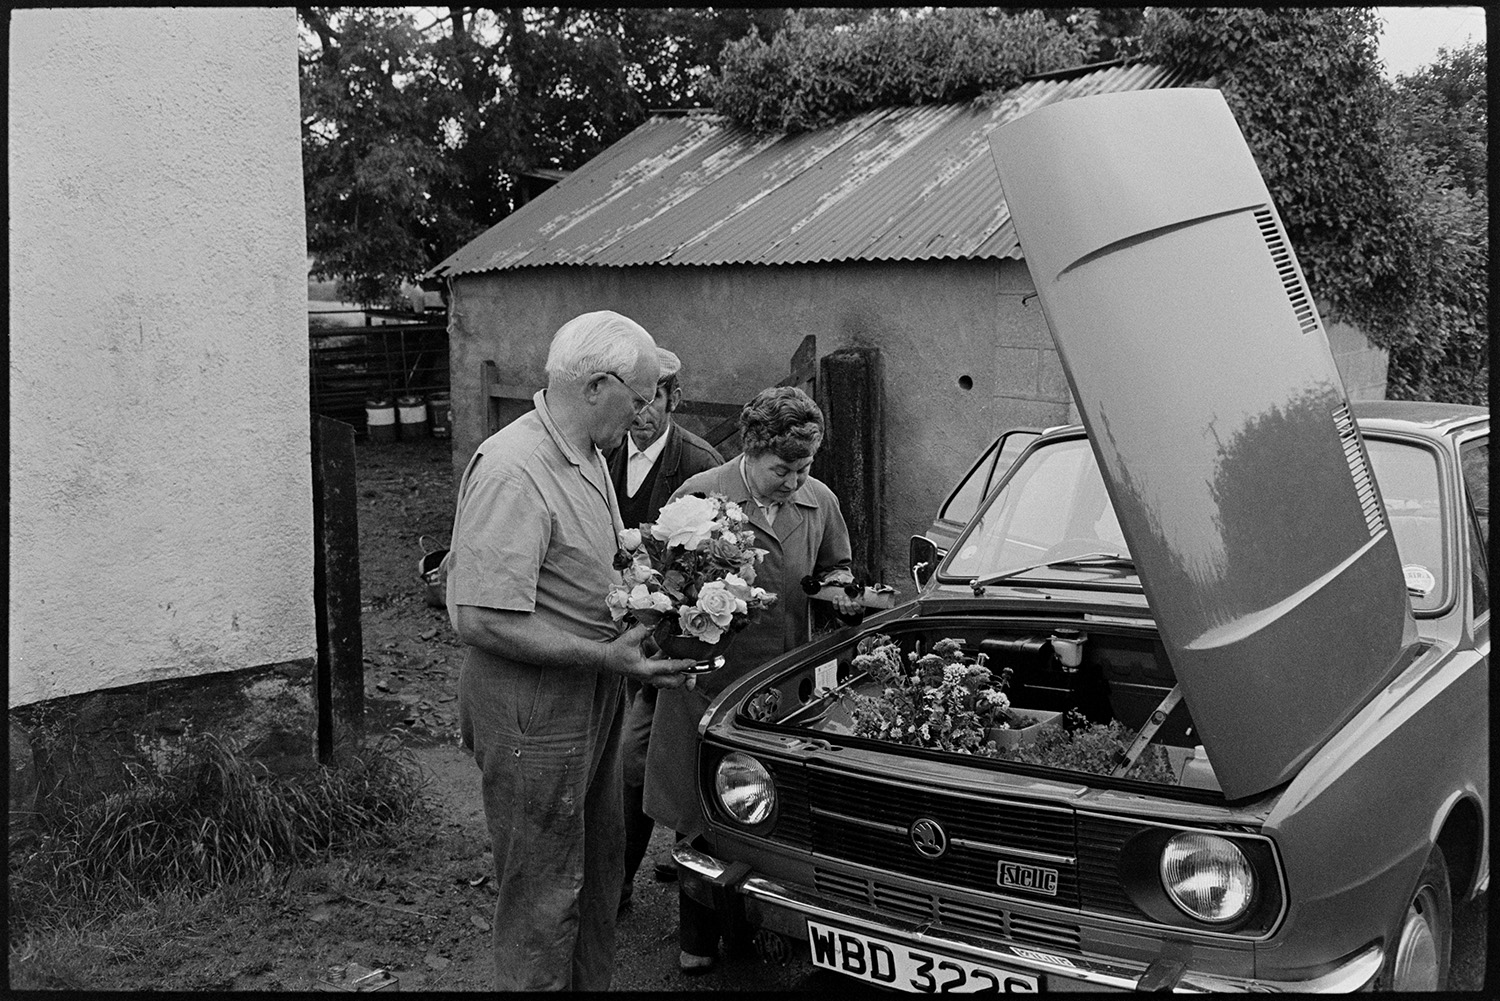 People bringing in entries for flower show and arranging them in village hall. 
[Two men and a woman looking at flower arrangements in a car which they are taking to Dolton Flower Show in Dolton Village Hall. The car storage is under the bonnet of the car.]